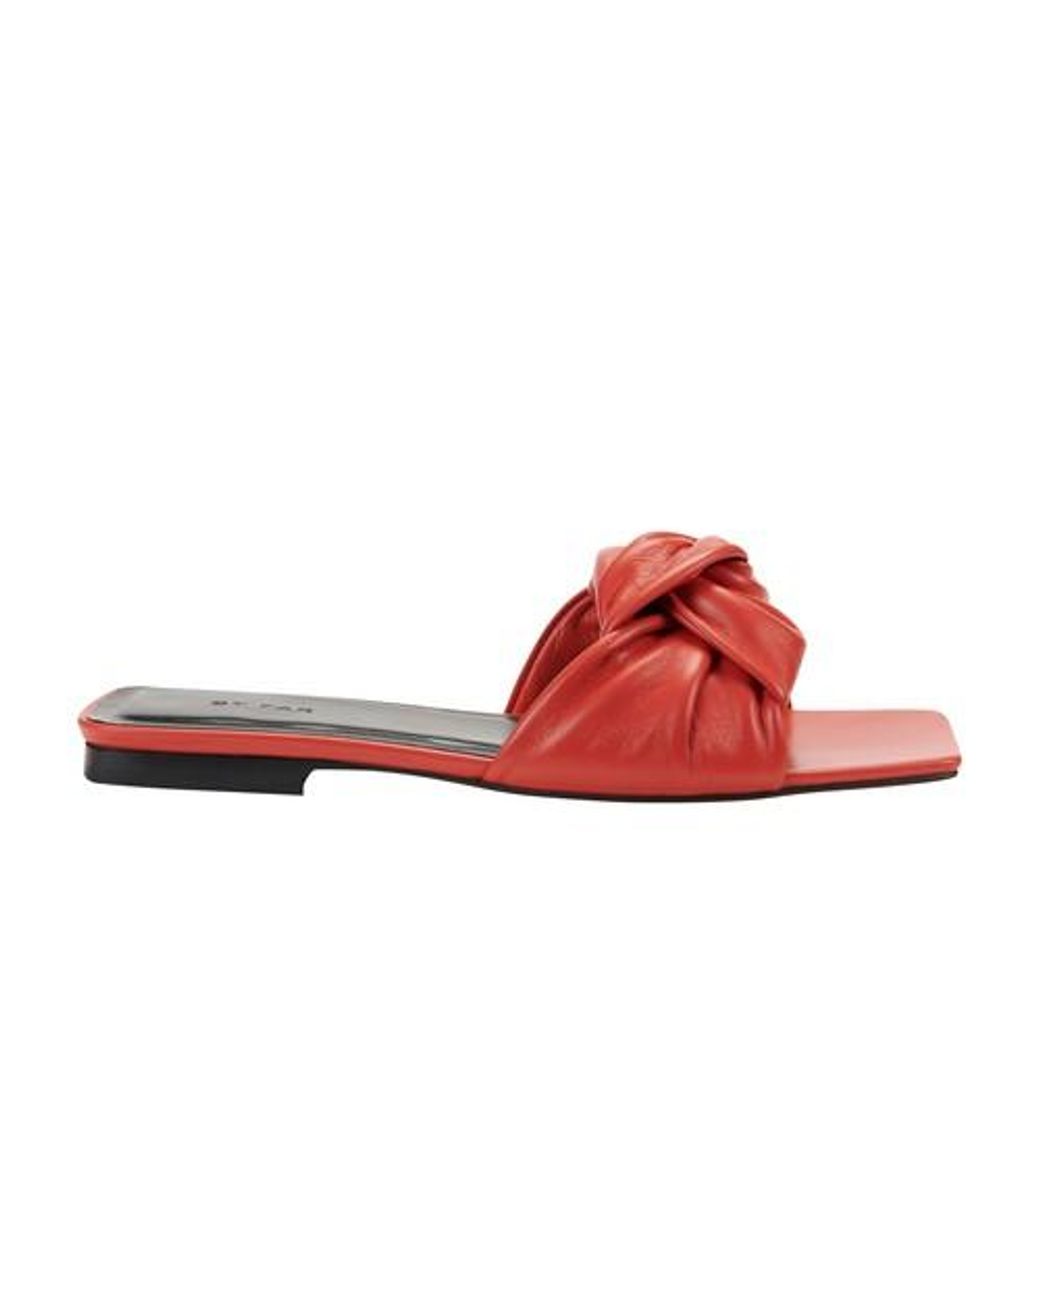 BY FAR Leather Lima Scarlet Sandals in Red | Lyst